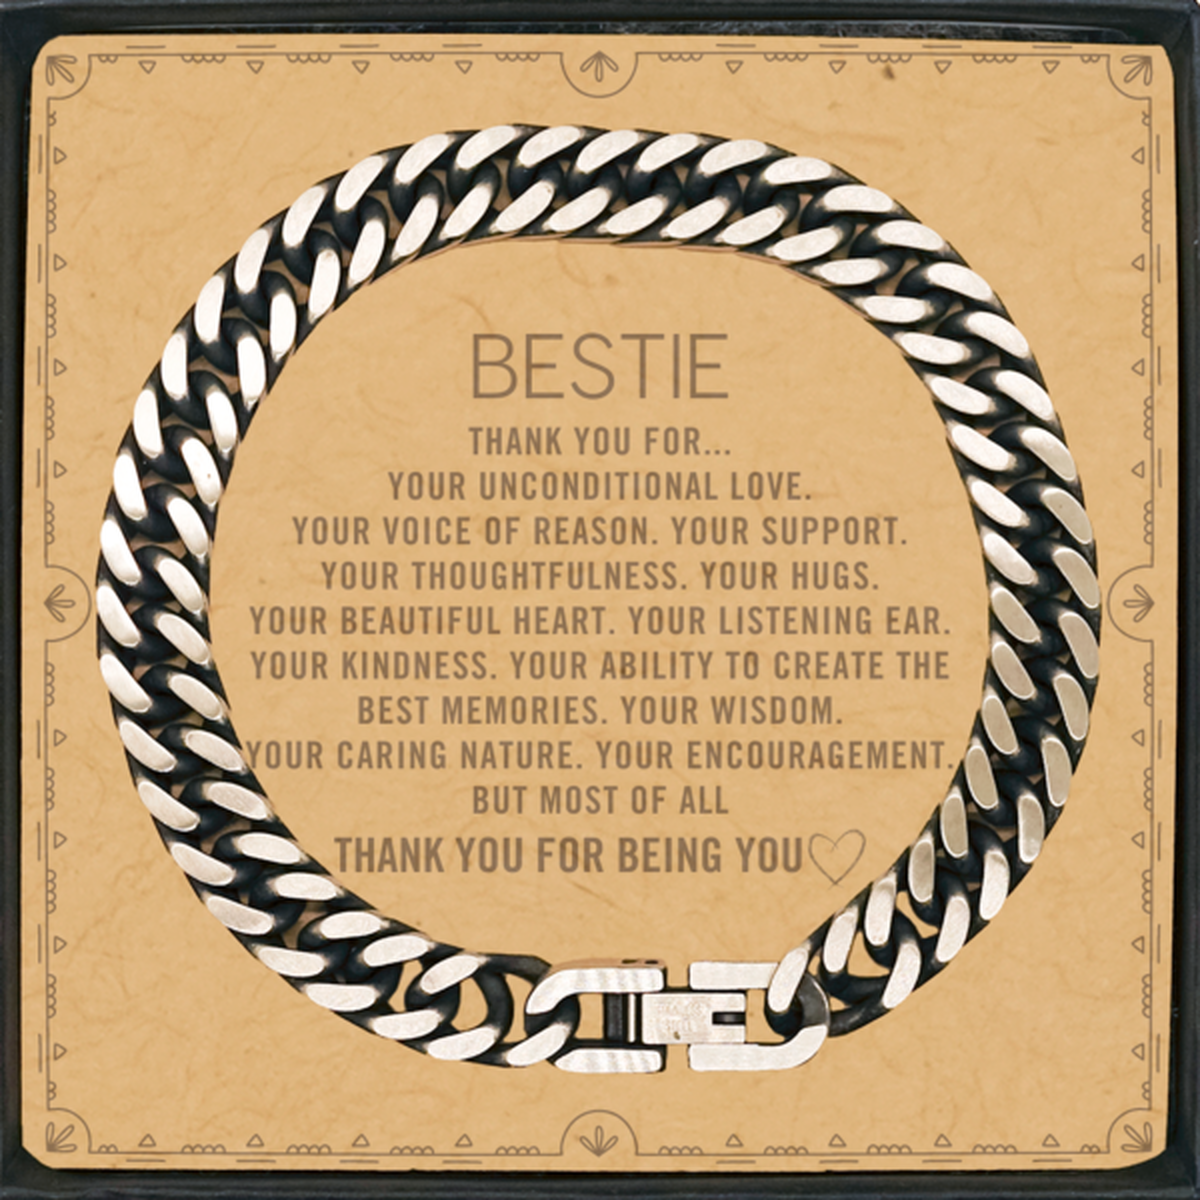 Bestie Cuban Link Chain Bracelet Custom, Message Card Gifts For Bestie Christmas Graduation Birthday Gifts for Men Women Bestie Thank you for Your unconditional love